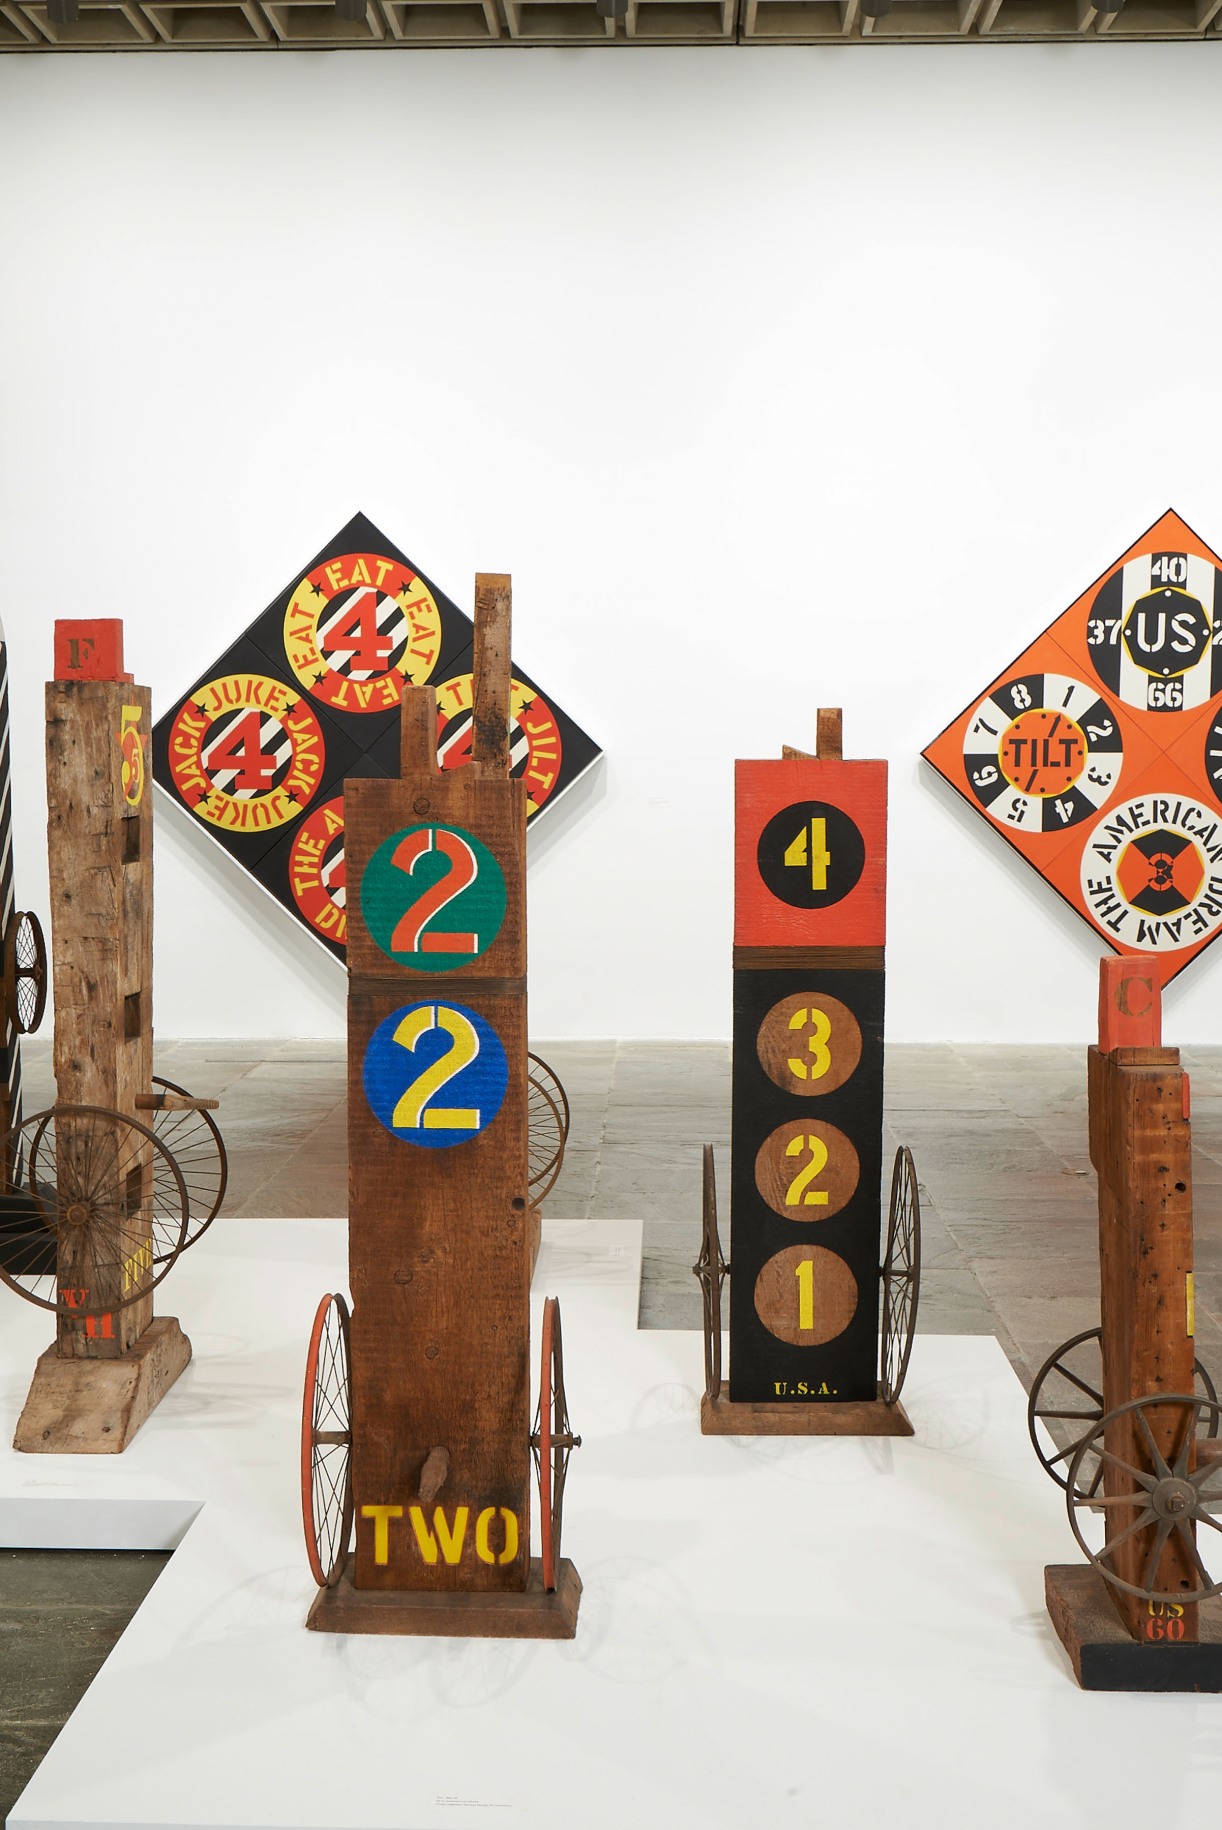 Installation view of&nbsp;Robert Indiana: Beyond LOVE, Whitney Museum of American Art, New York, September 26, 2013&ndash;January 5, 2014, featuring the verso of Six (1960&ndash;62), to the right of Two (1960&ndash;62), &nbsp;